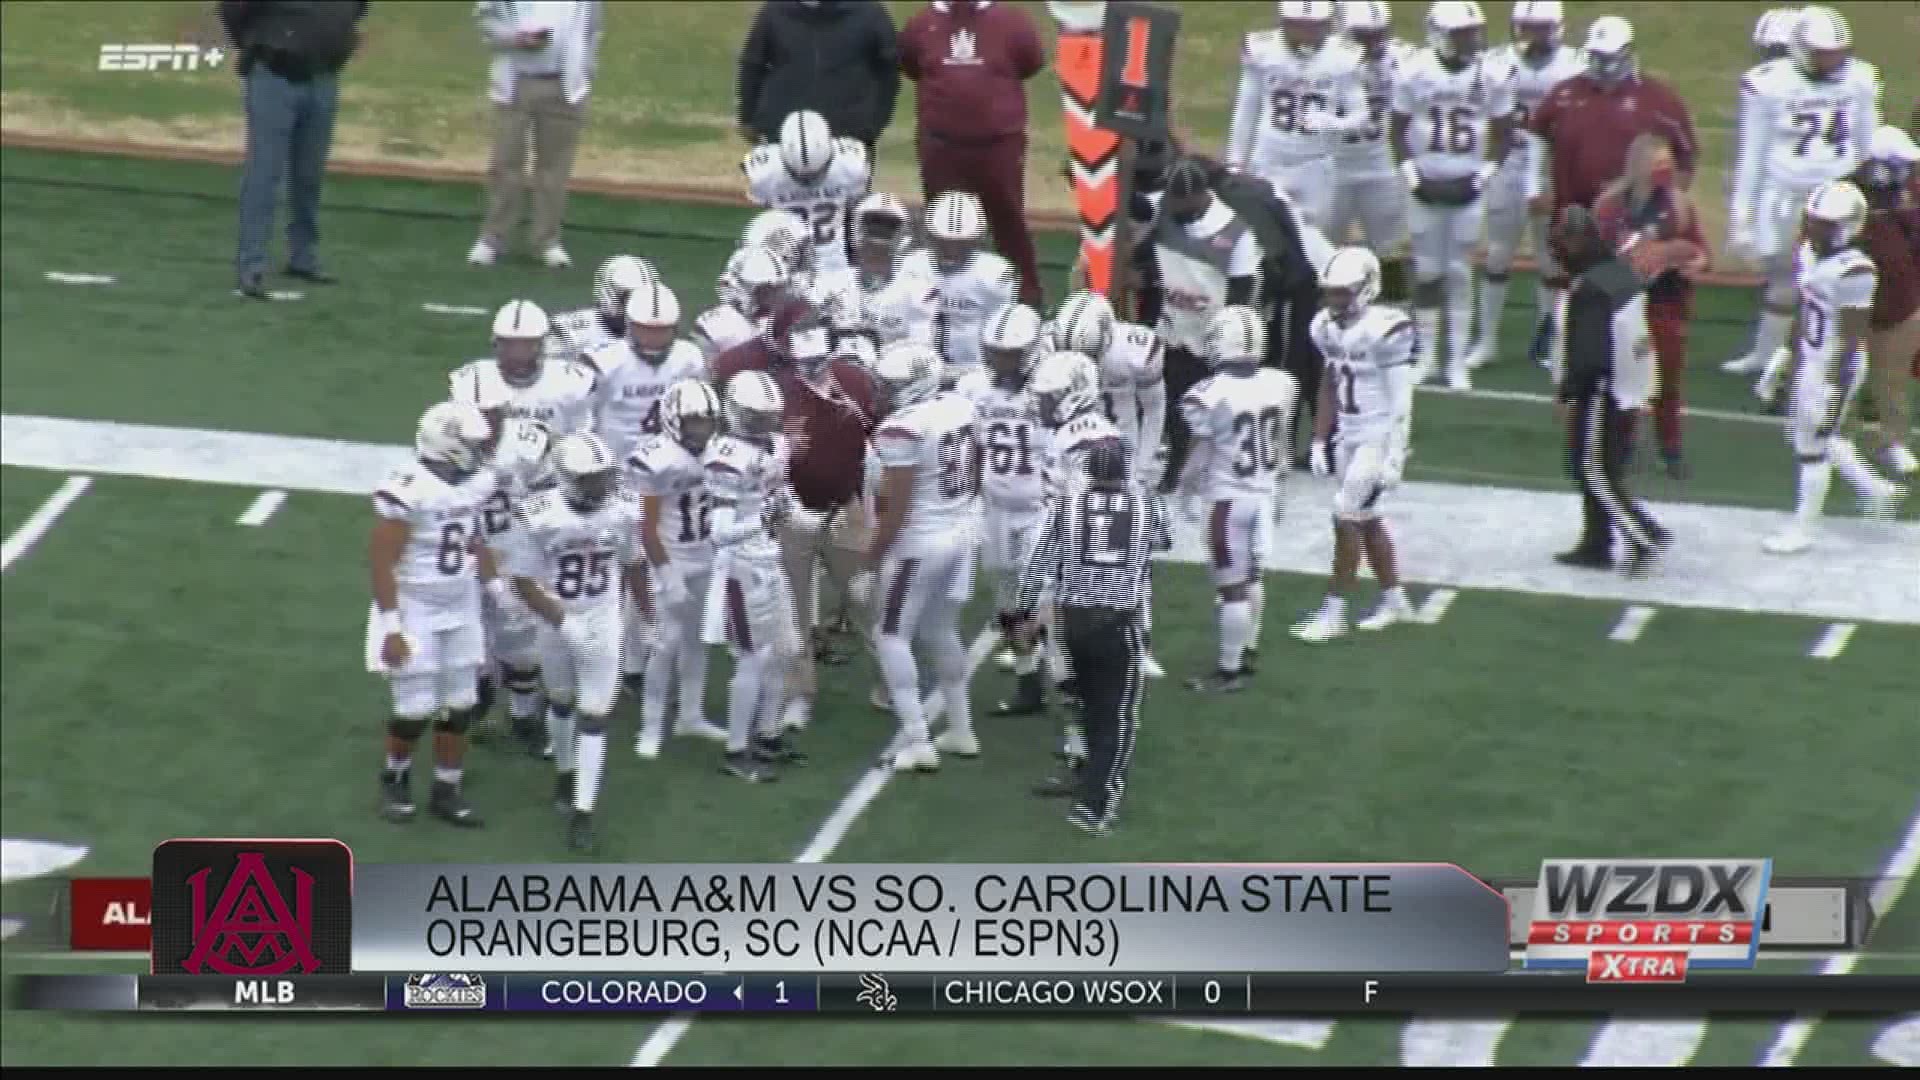 Aqeel Glass threw for 272 yards and four touchdowns & AAMU bounced South Carolina State 31-7 on Saturday in a non-conference FCS spring opener for both teams